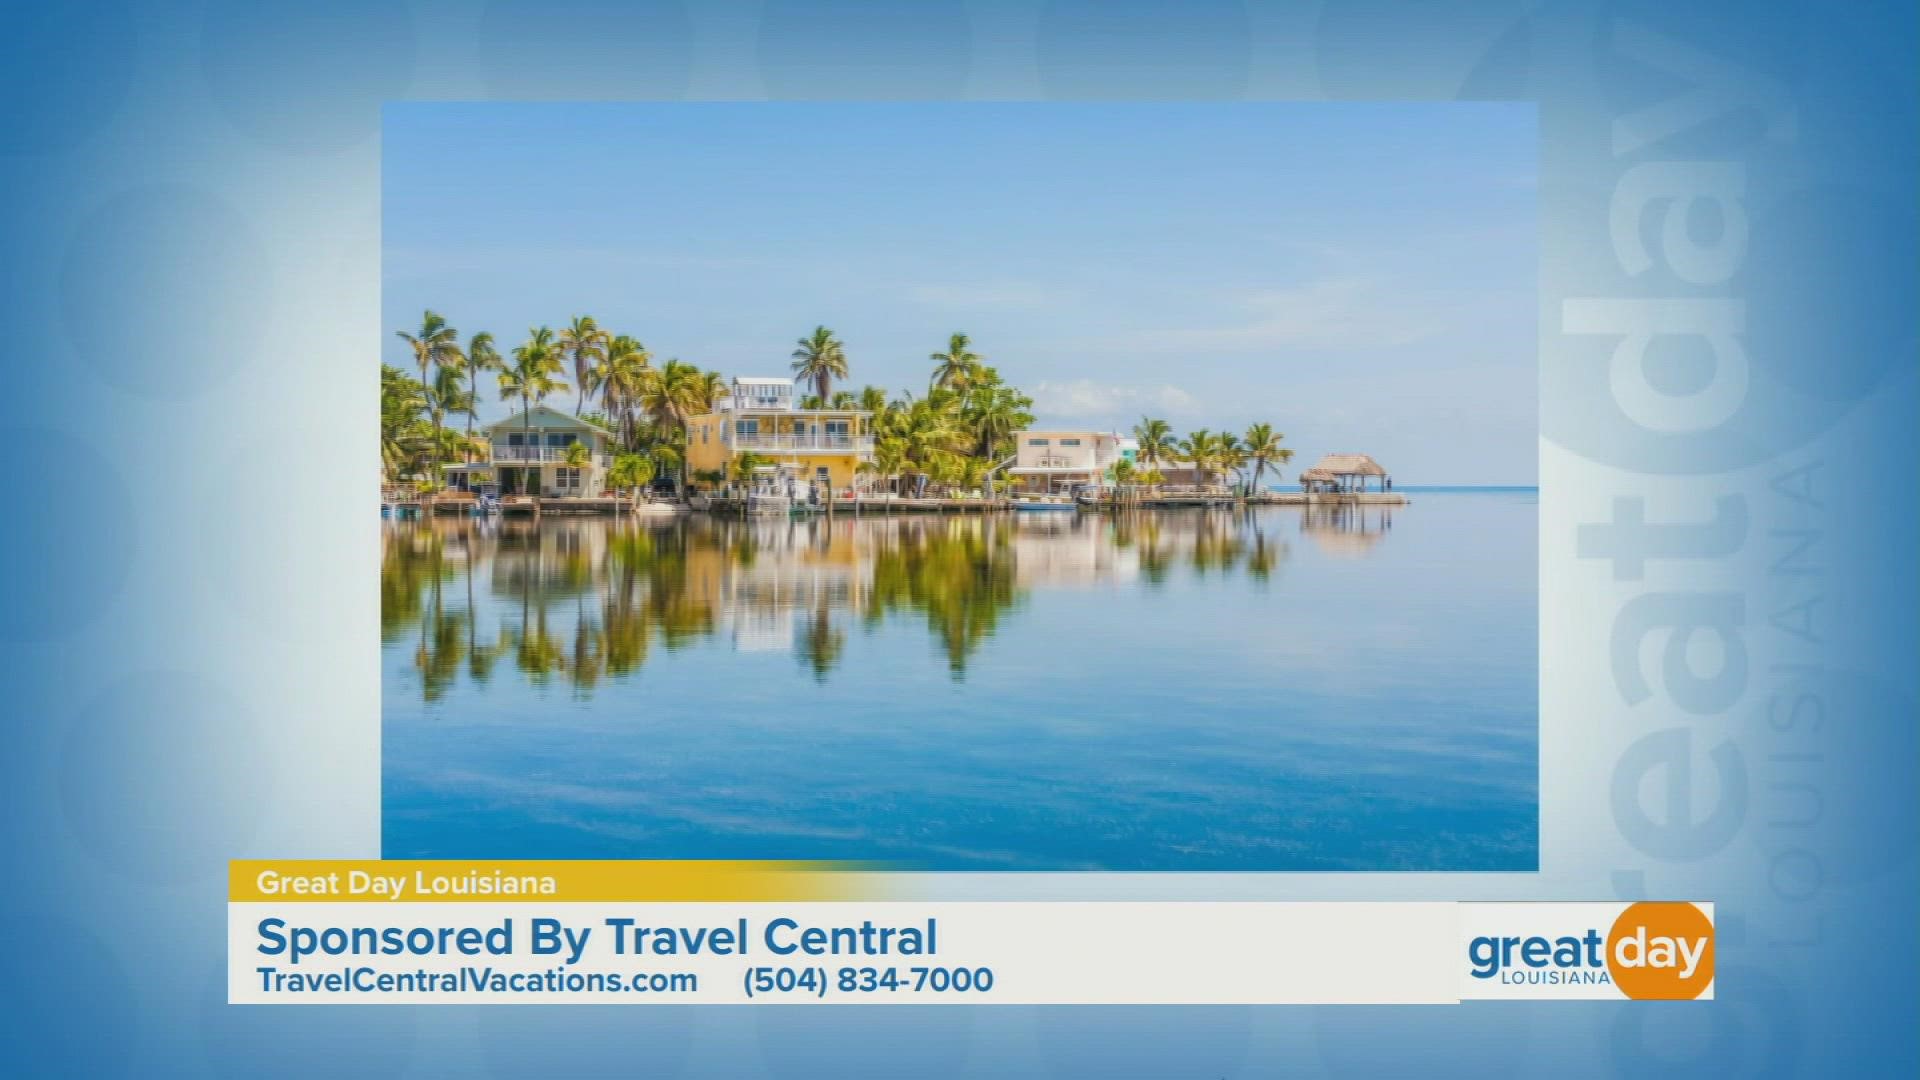 Have fun in 2022! Travel Central discusses some of the most recommended travel destinations this Summer including Mexico, the Caribbean, and U.S. National Parks!